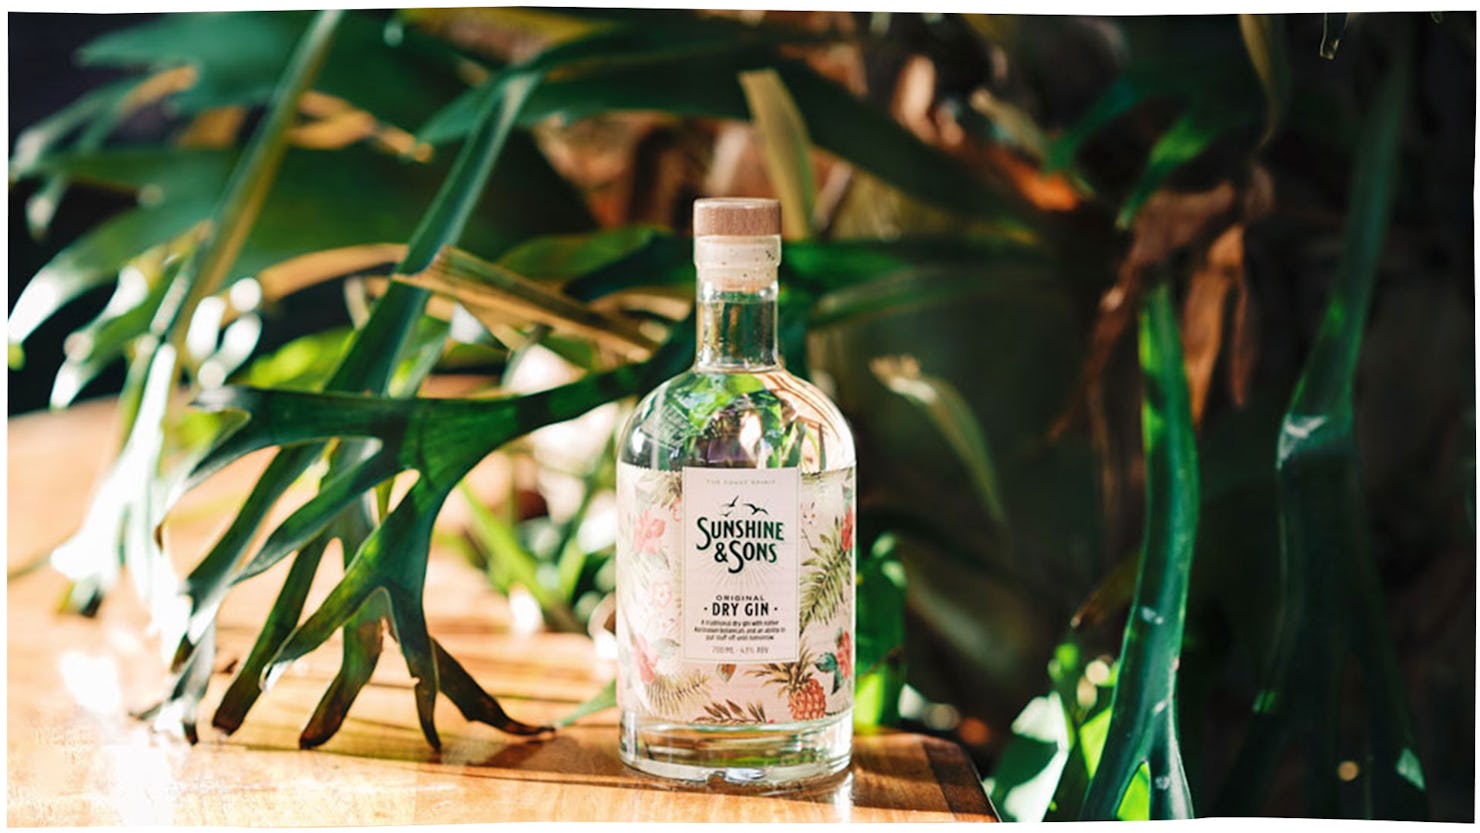 Dry gin by Sunshine and Sons